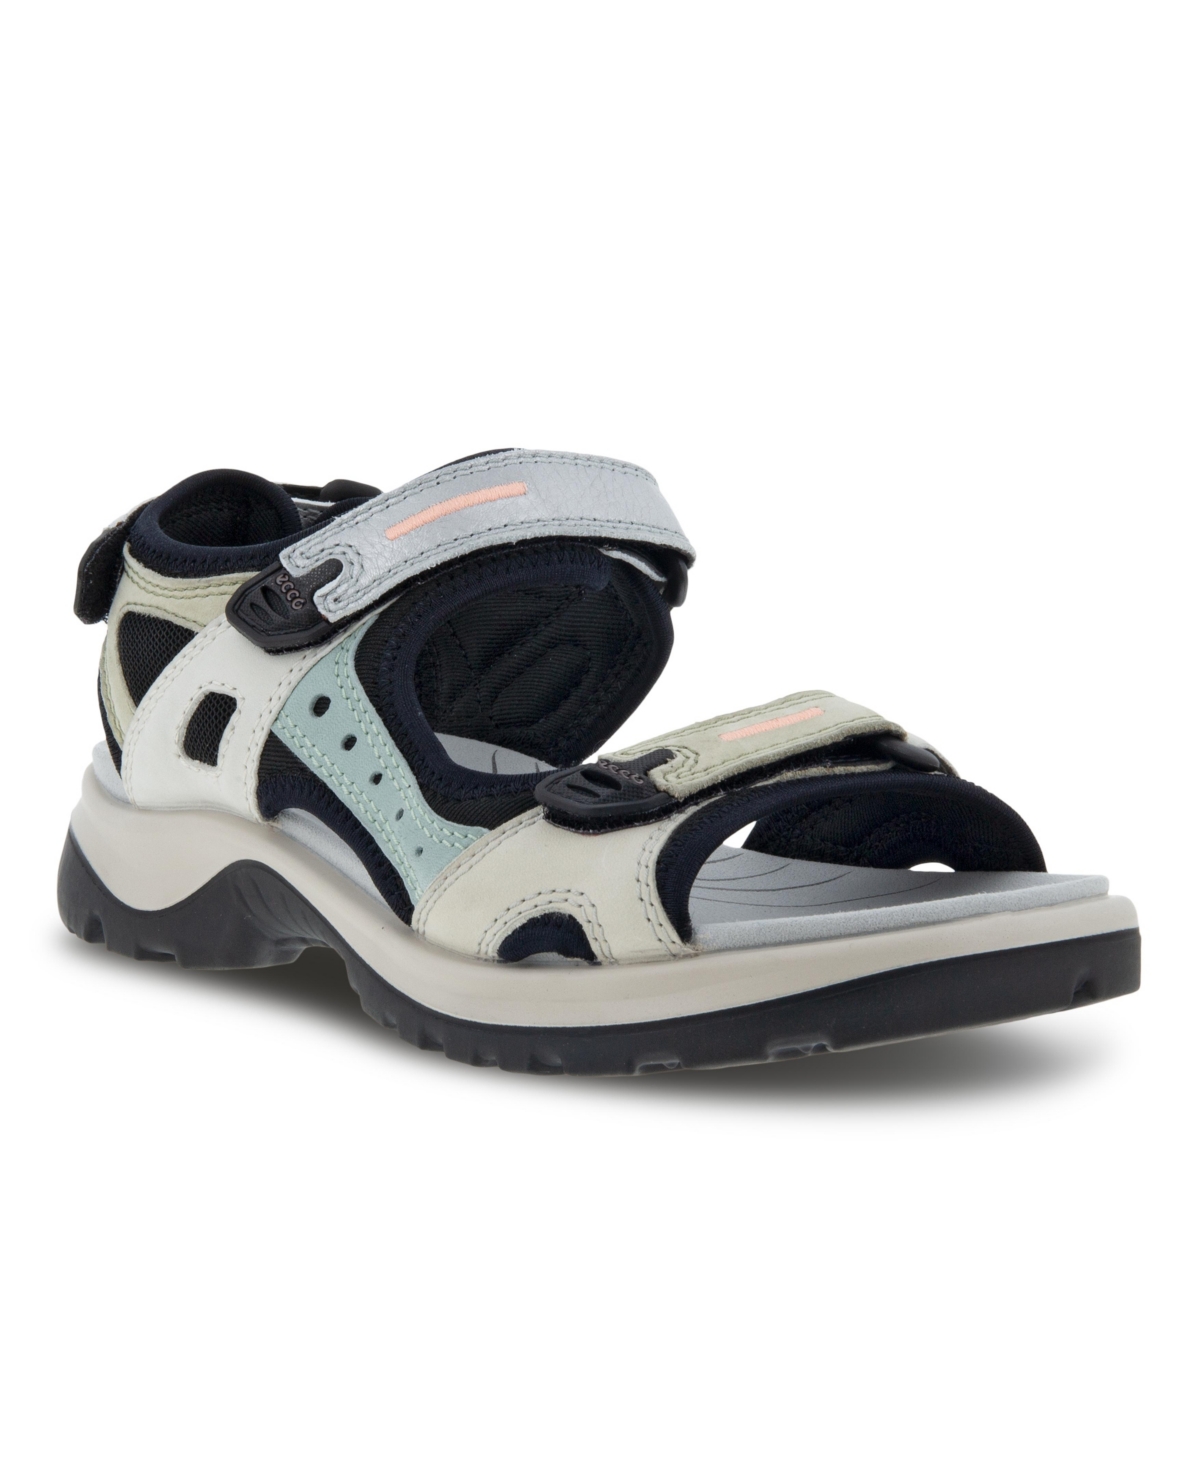 UPC 194891064262 product image for Ecco Women's Offroad Sandals Women's Shoes | upcitemdb.com